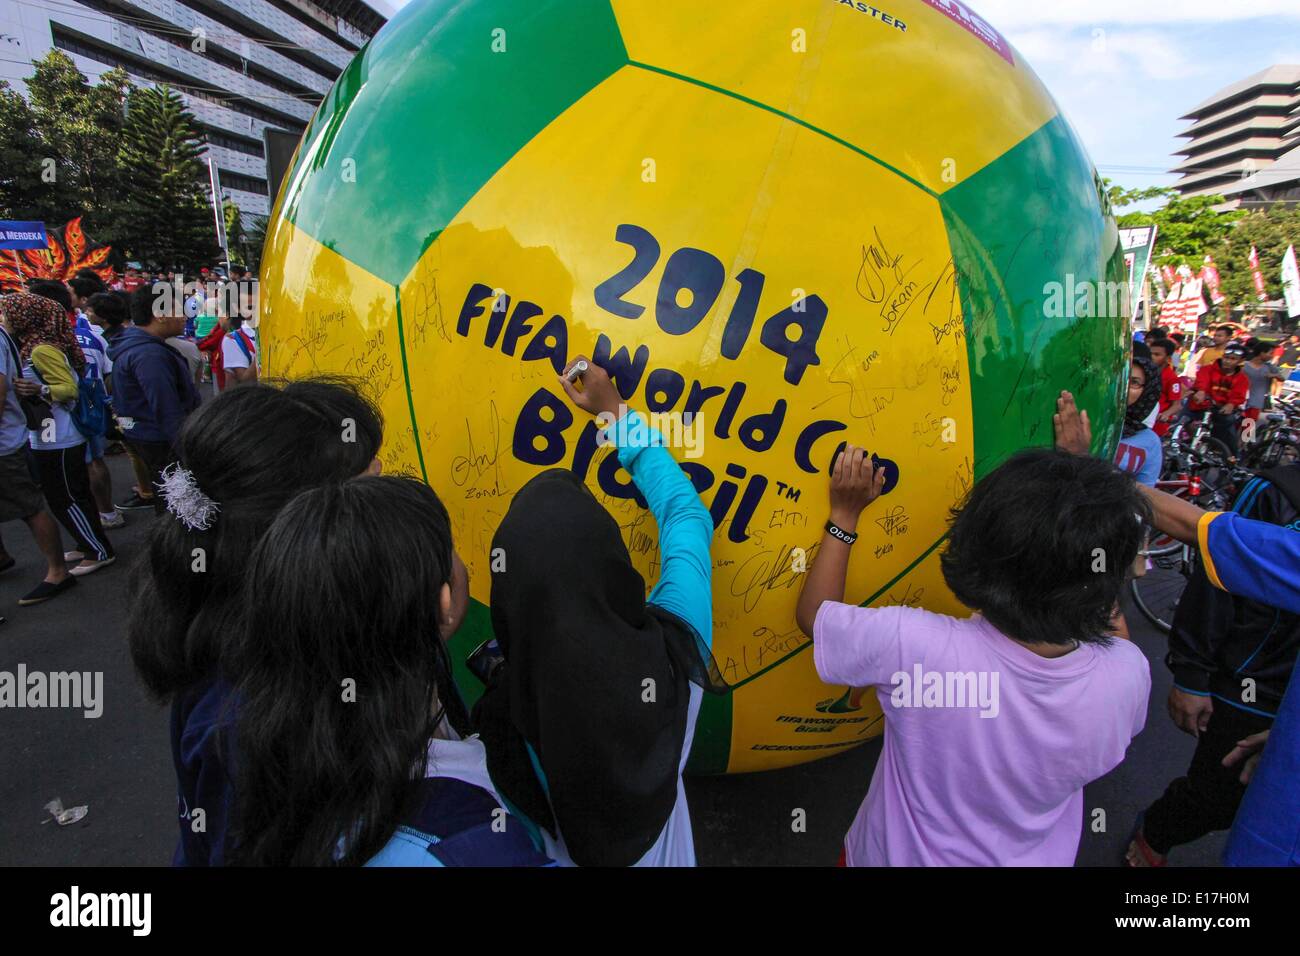 Semarang, Central Java, Indonesia. 25th May, 2014. SEMARANG, CENTRAL JAVA, INDONESIA - MAY 25: Indonesian peoples sign at giant ball to welcome the 2014 FIFA World Cup, International men's football tournament scheduled to take place in Brazil from 12 June to 13 July 2014, in Semarang, Central Java, Indonesia on May 25, 2014. Credit:  Sijori Images/ZUMAPRESS.com/Alamy Live News Stock Photo